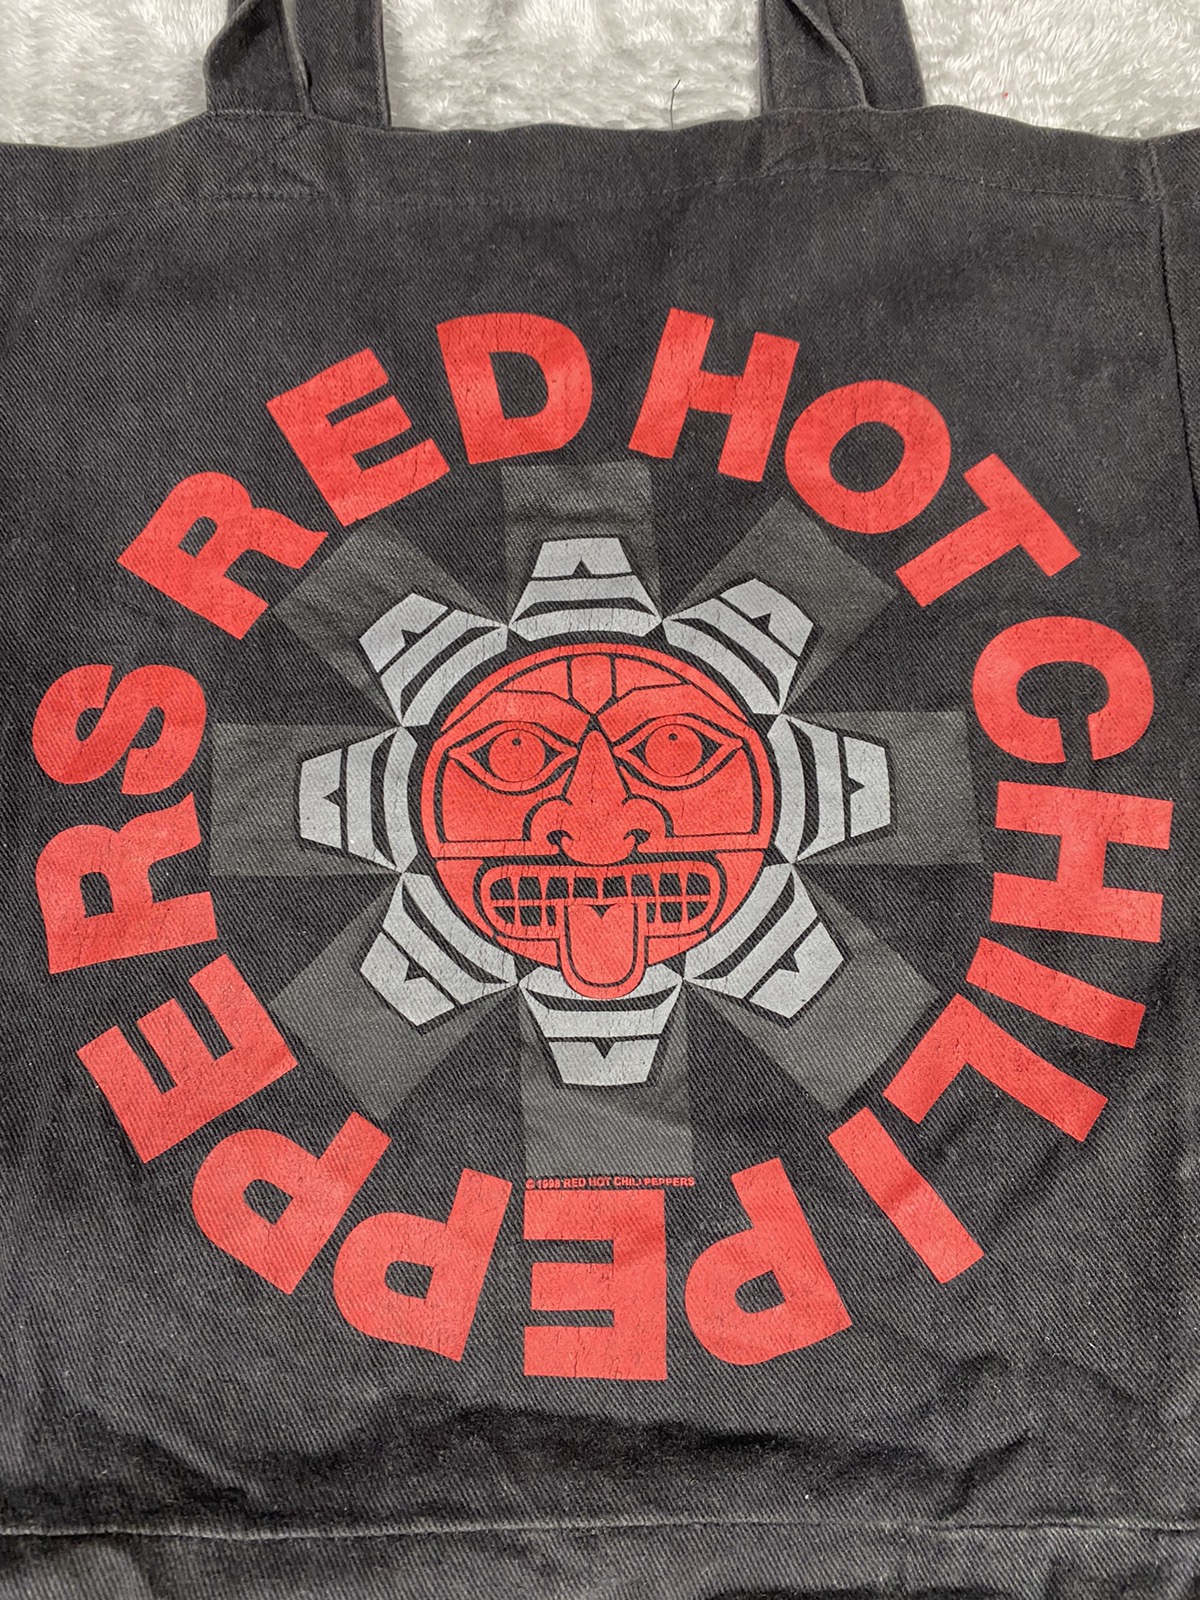 Vintage - Vintage Bootleg Red Hot Chili Peppers - 3